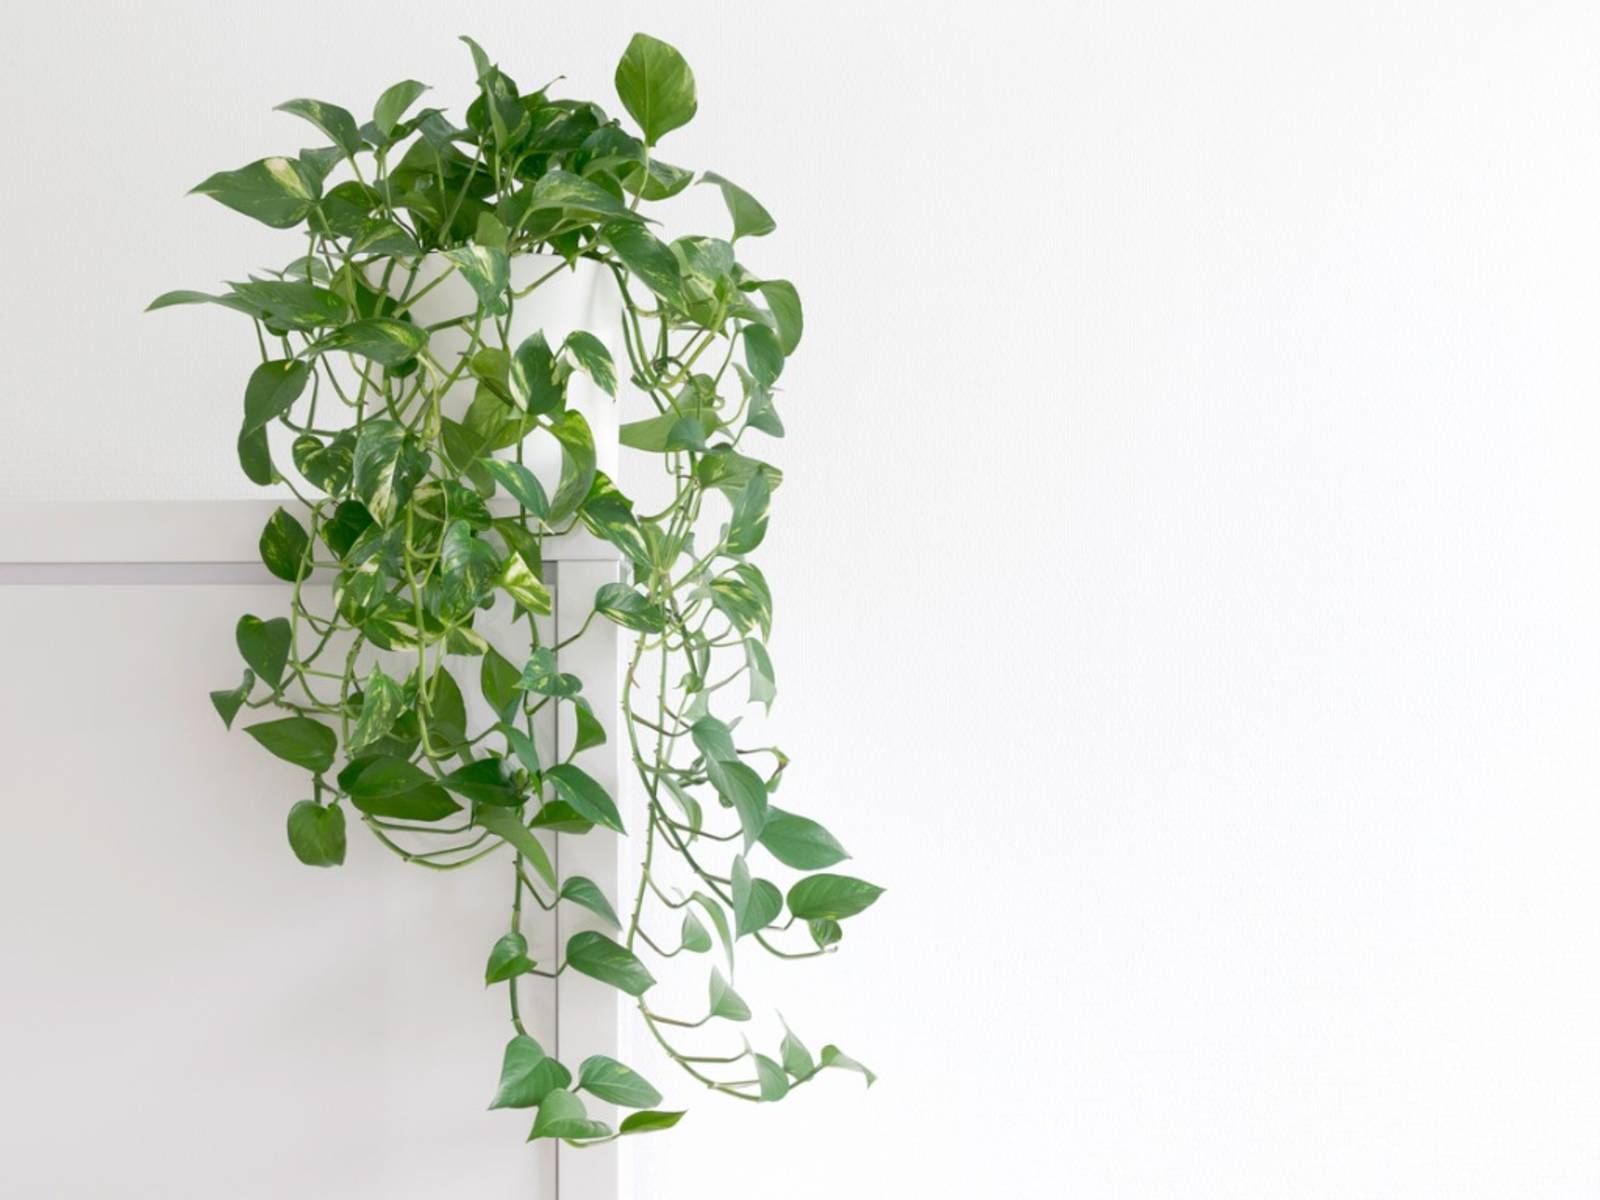 Golden pothos cleanses the air from toxins (from Gardening Know How)